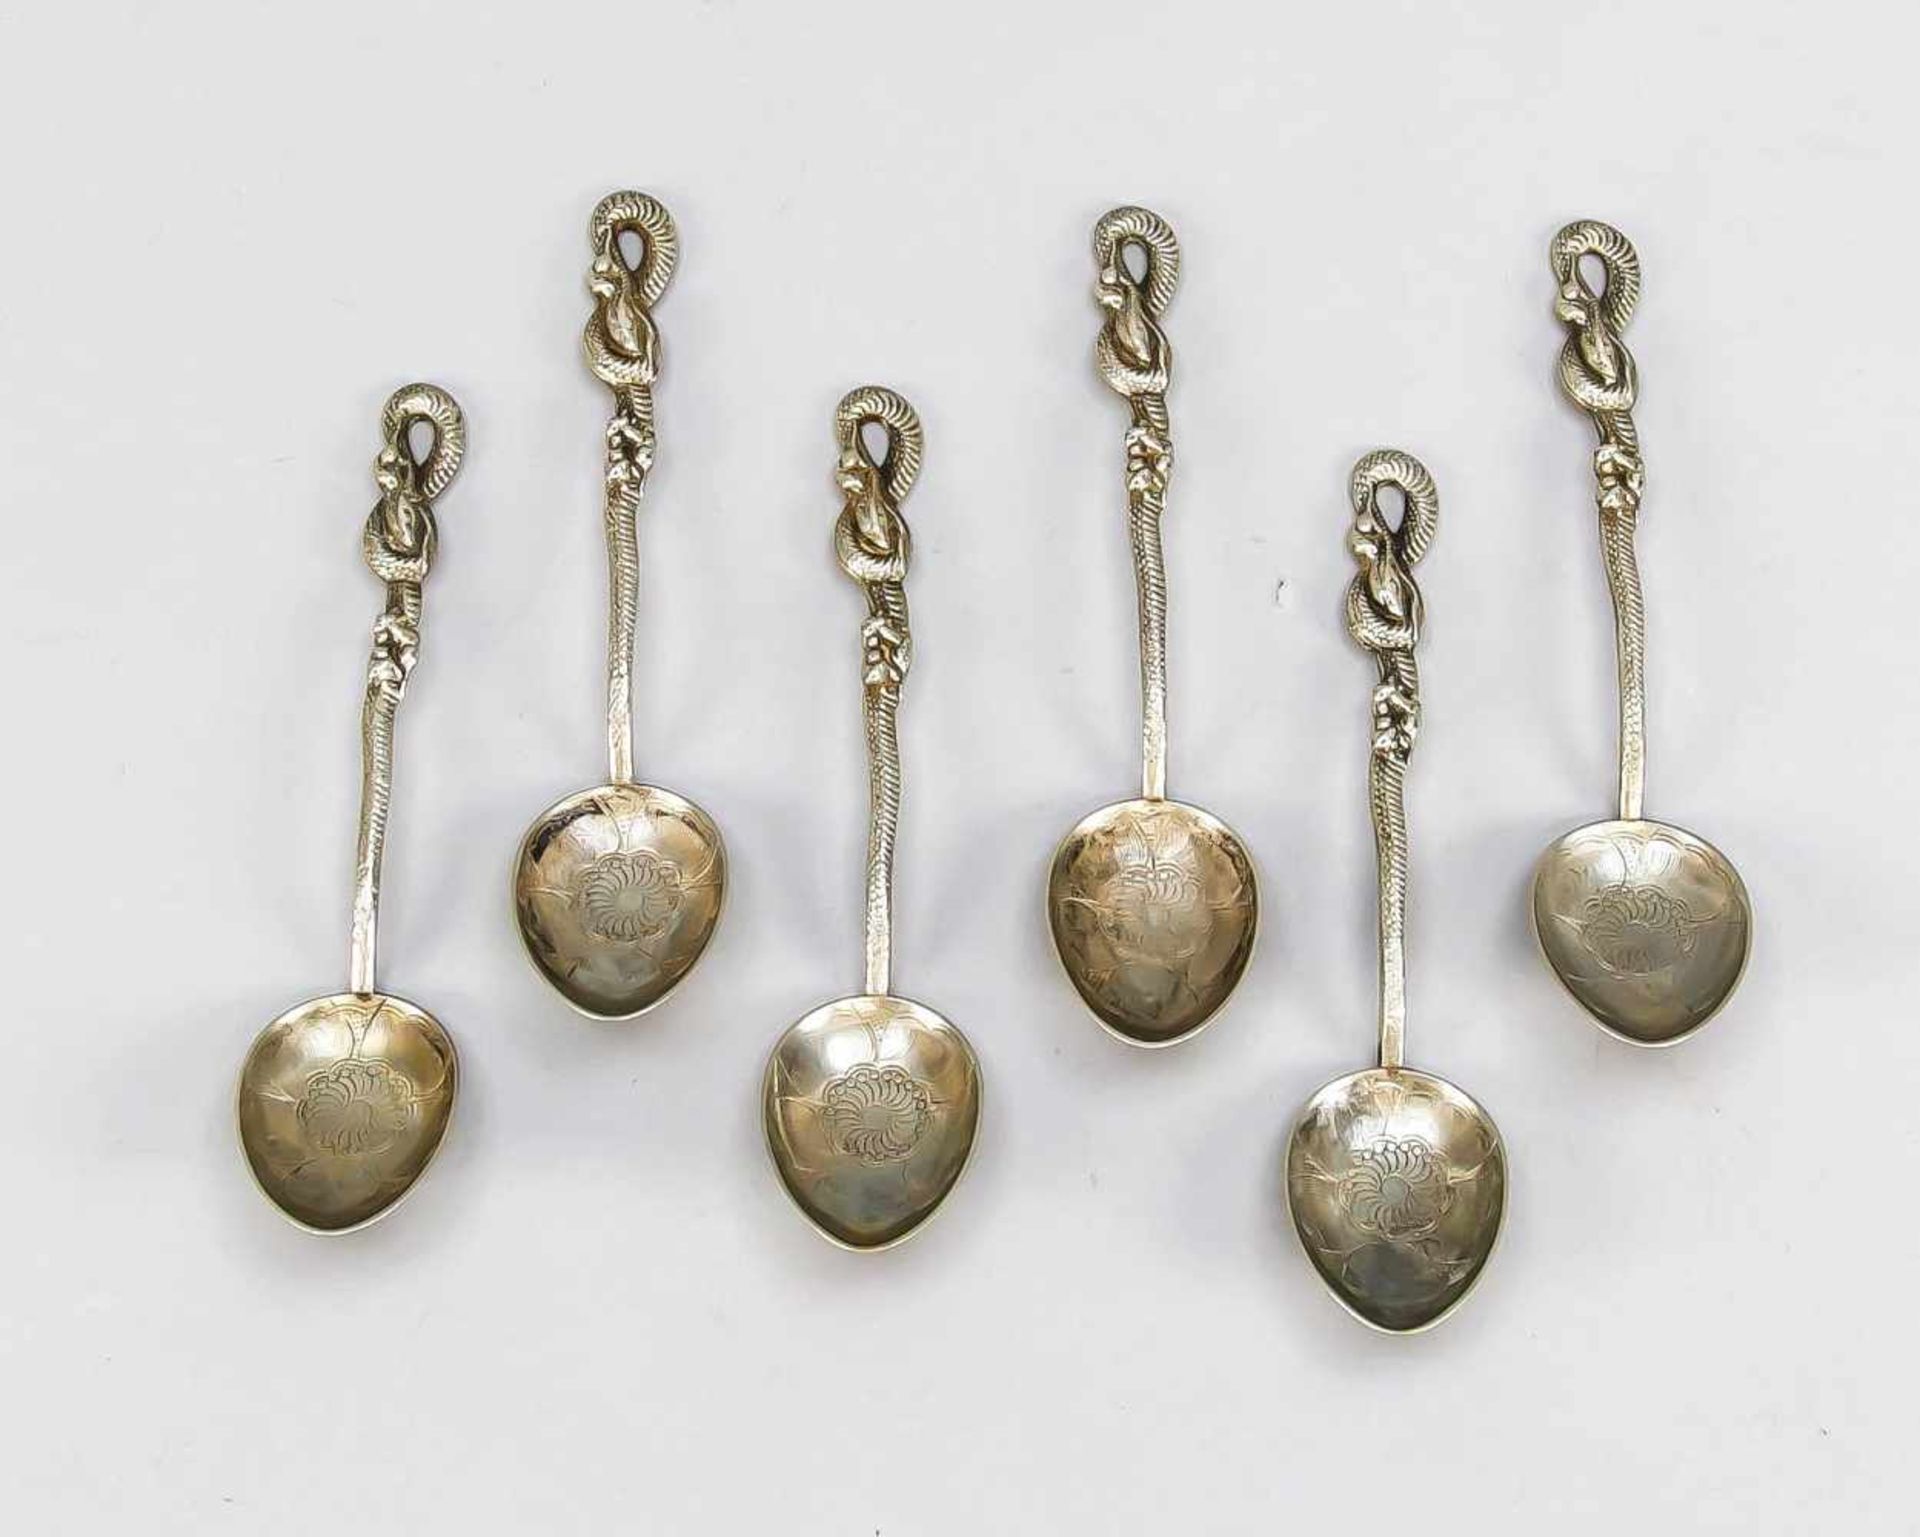 Six teaspoons, Japan, around 1900, hallmarked, silver 900/000, stem end in the form of aserpent,